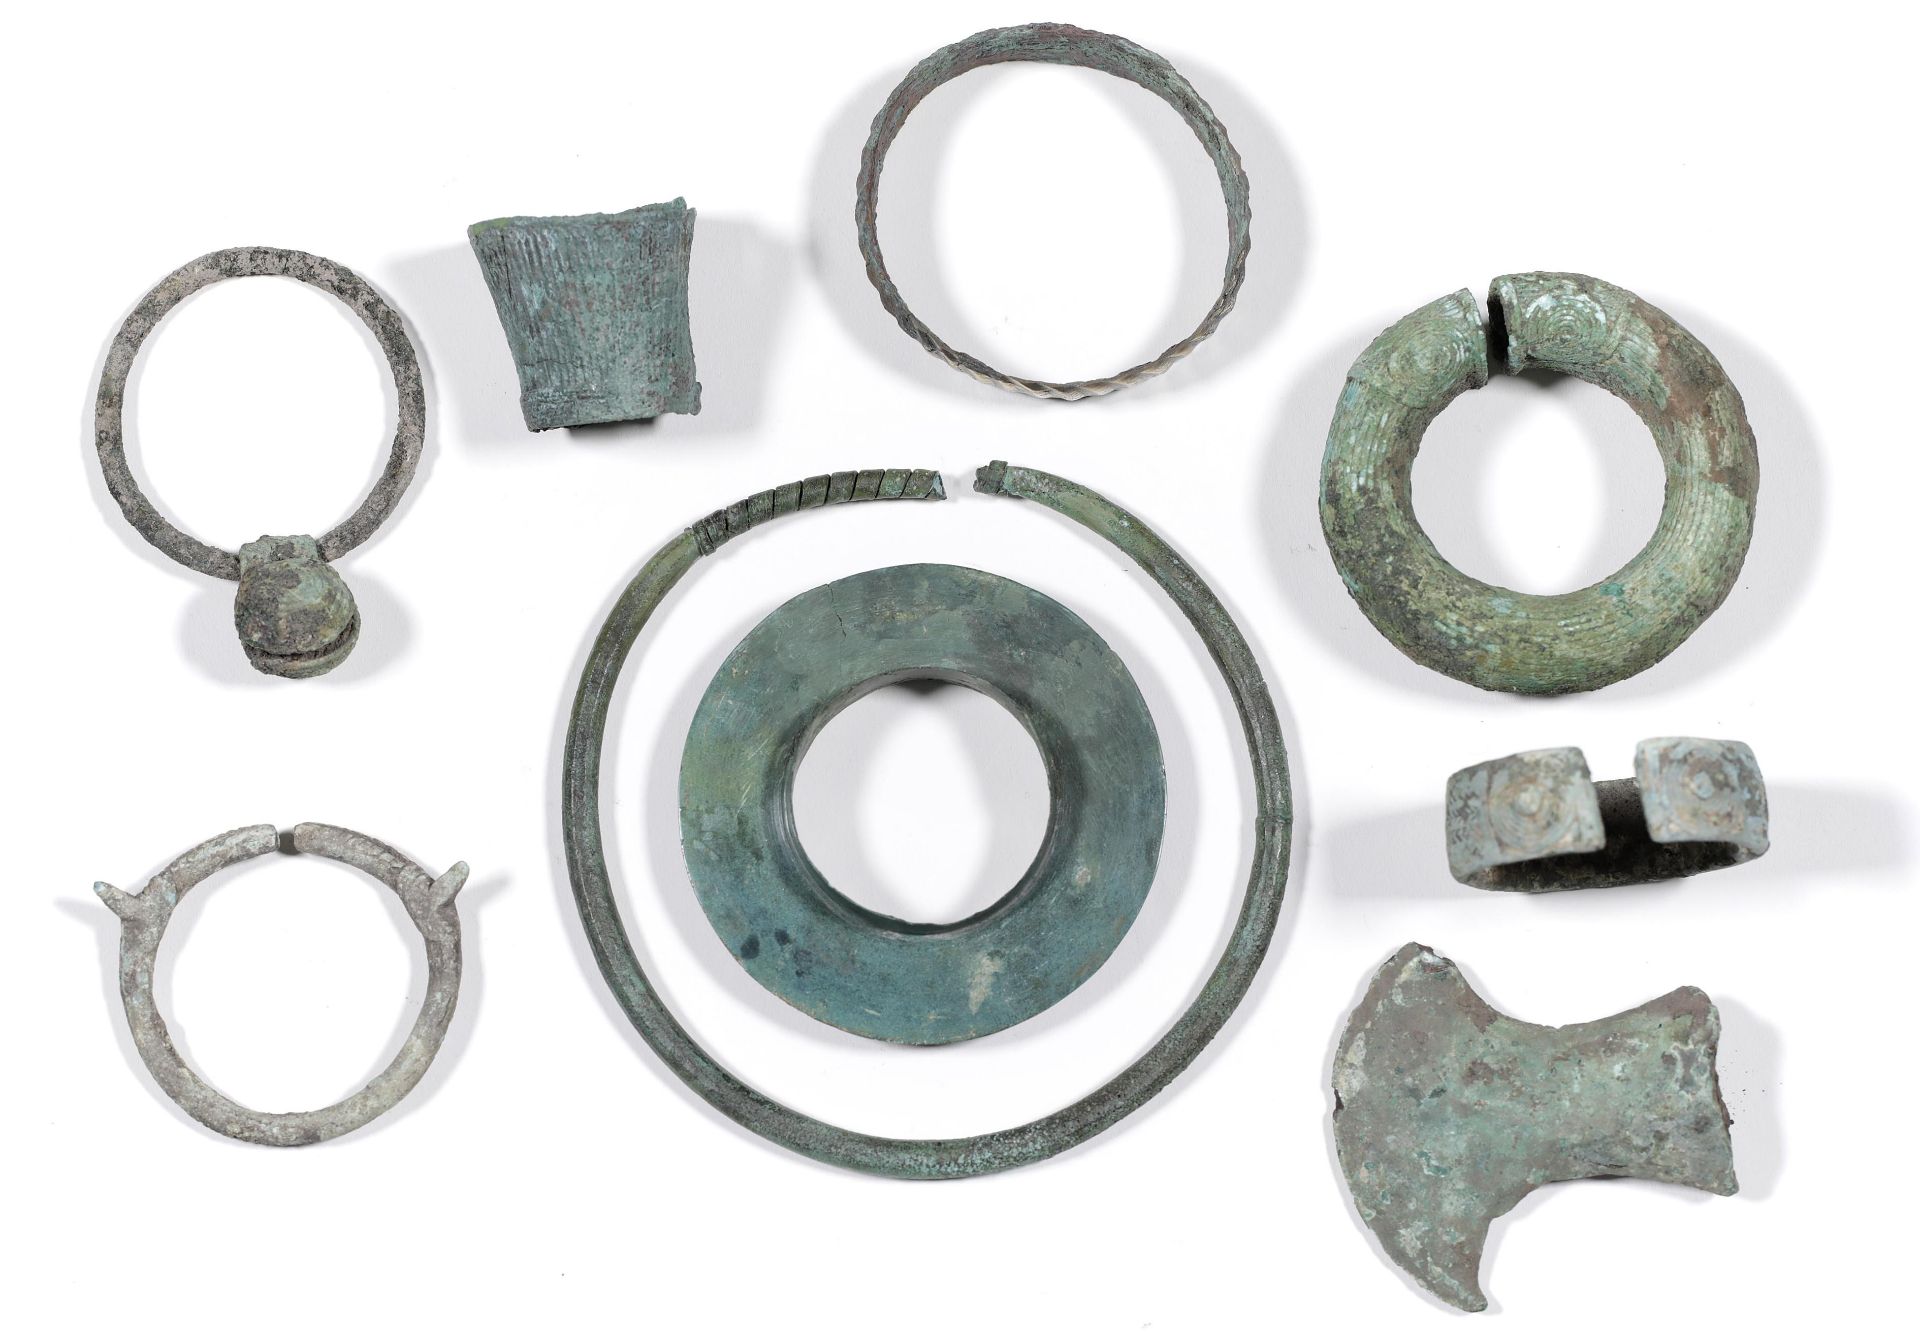 Thailand, Ban Chiang, a collection of nine bronze objects, ca. 1500-800 BC;